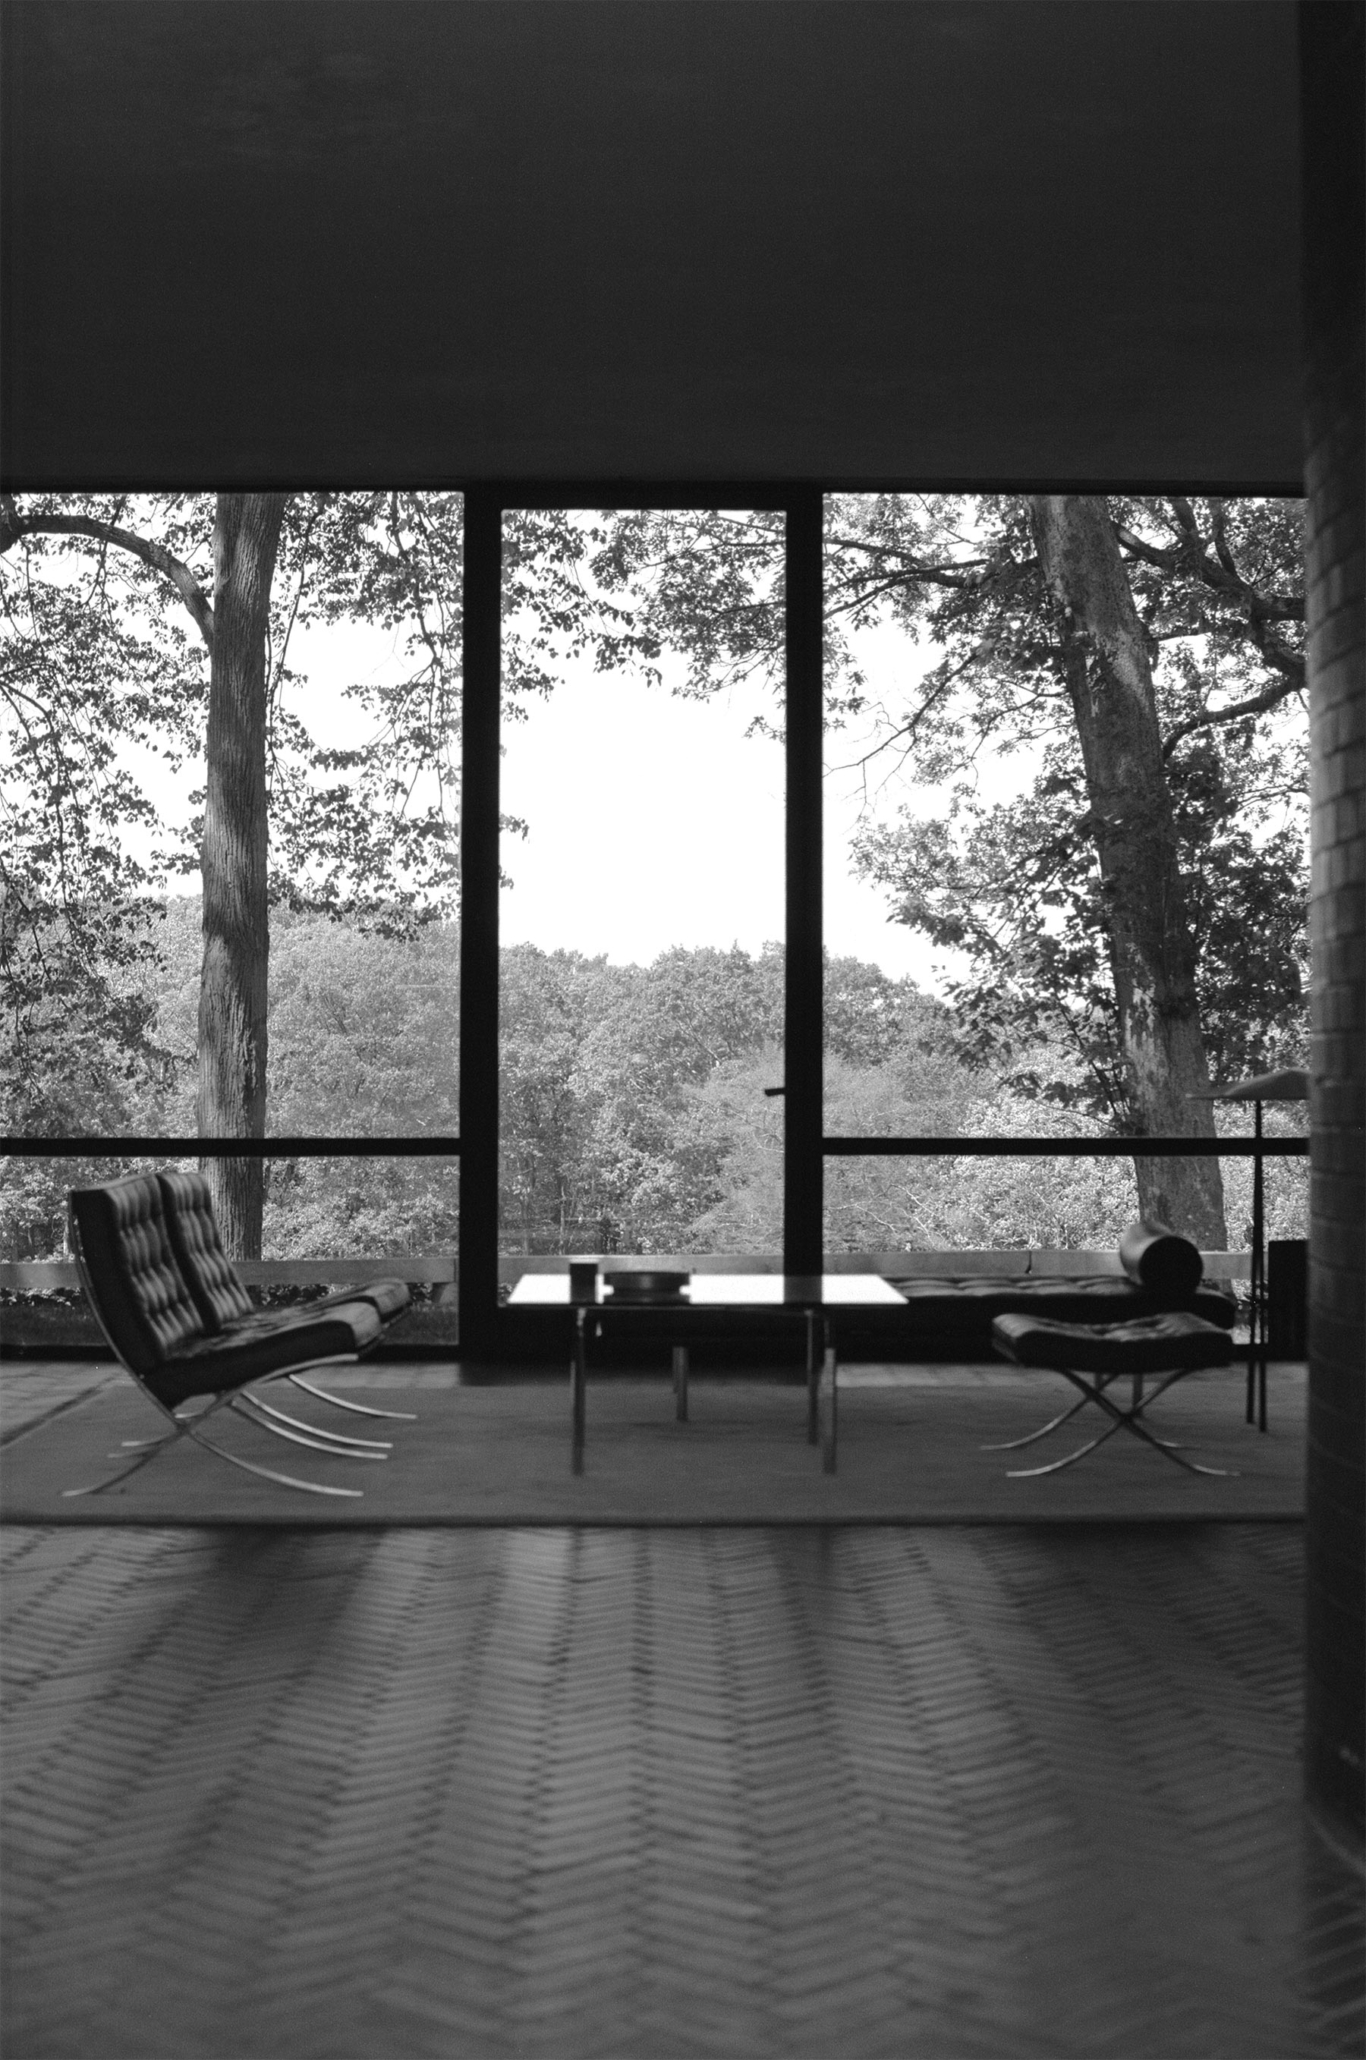 Reflecting Transparency⸺Philip Johnson's Iconic Glass House